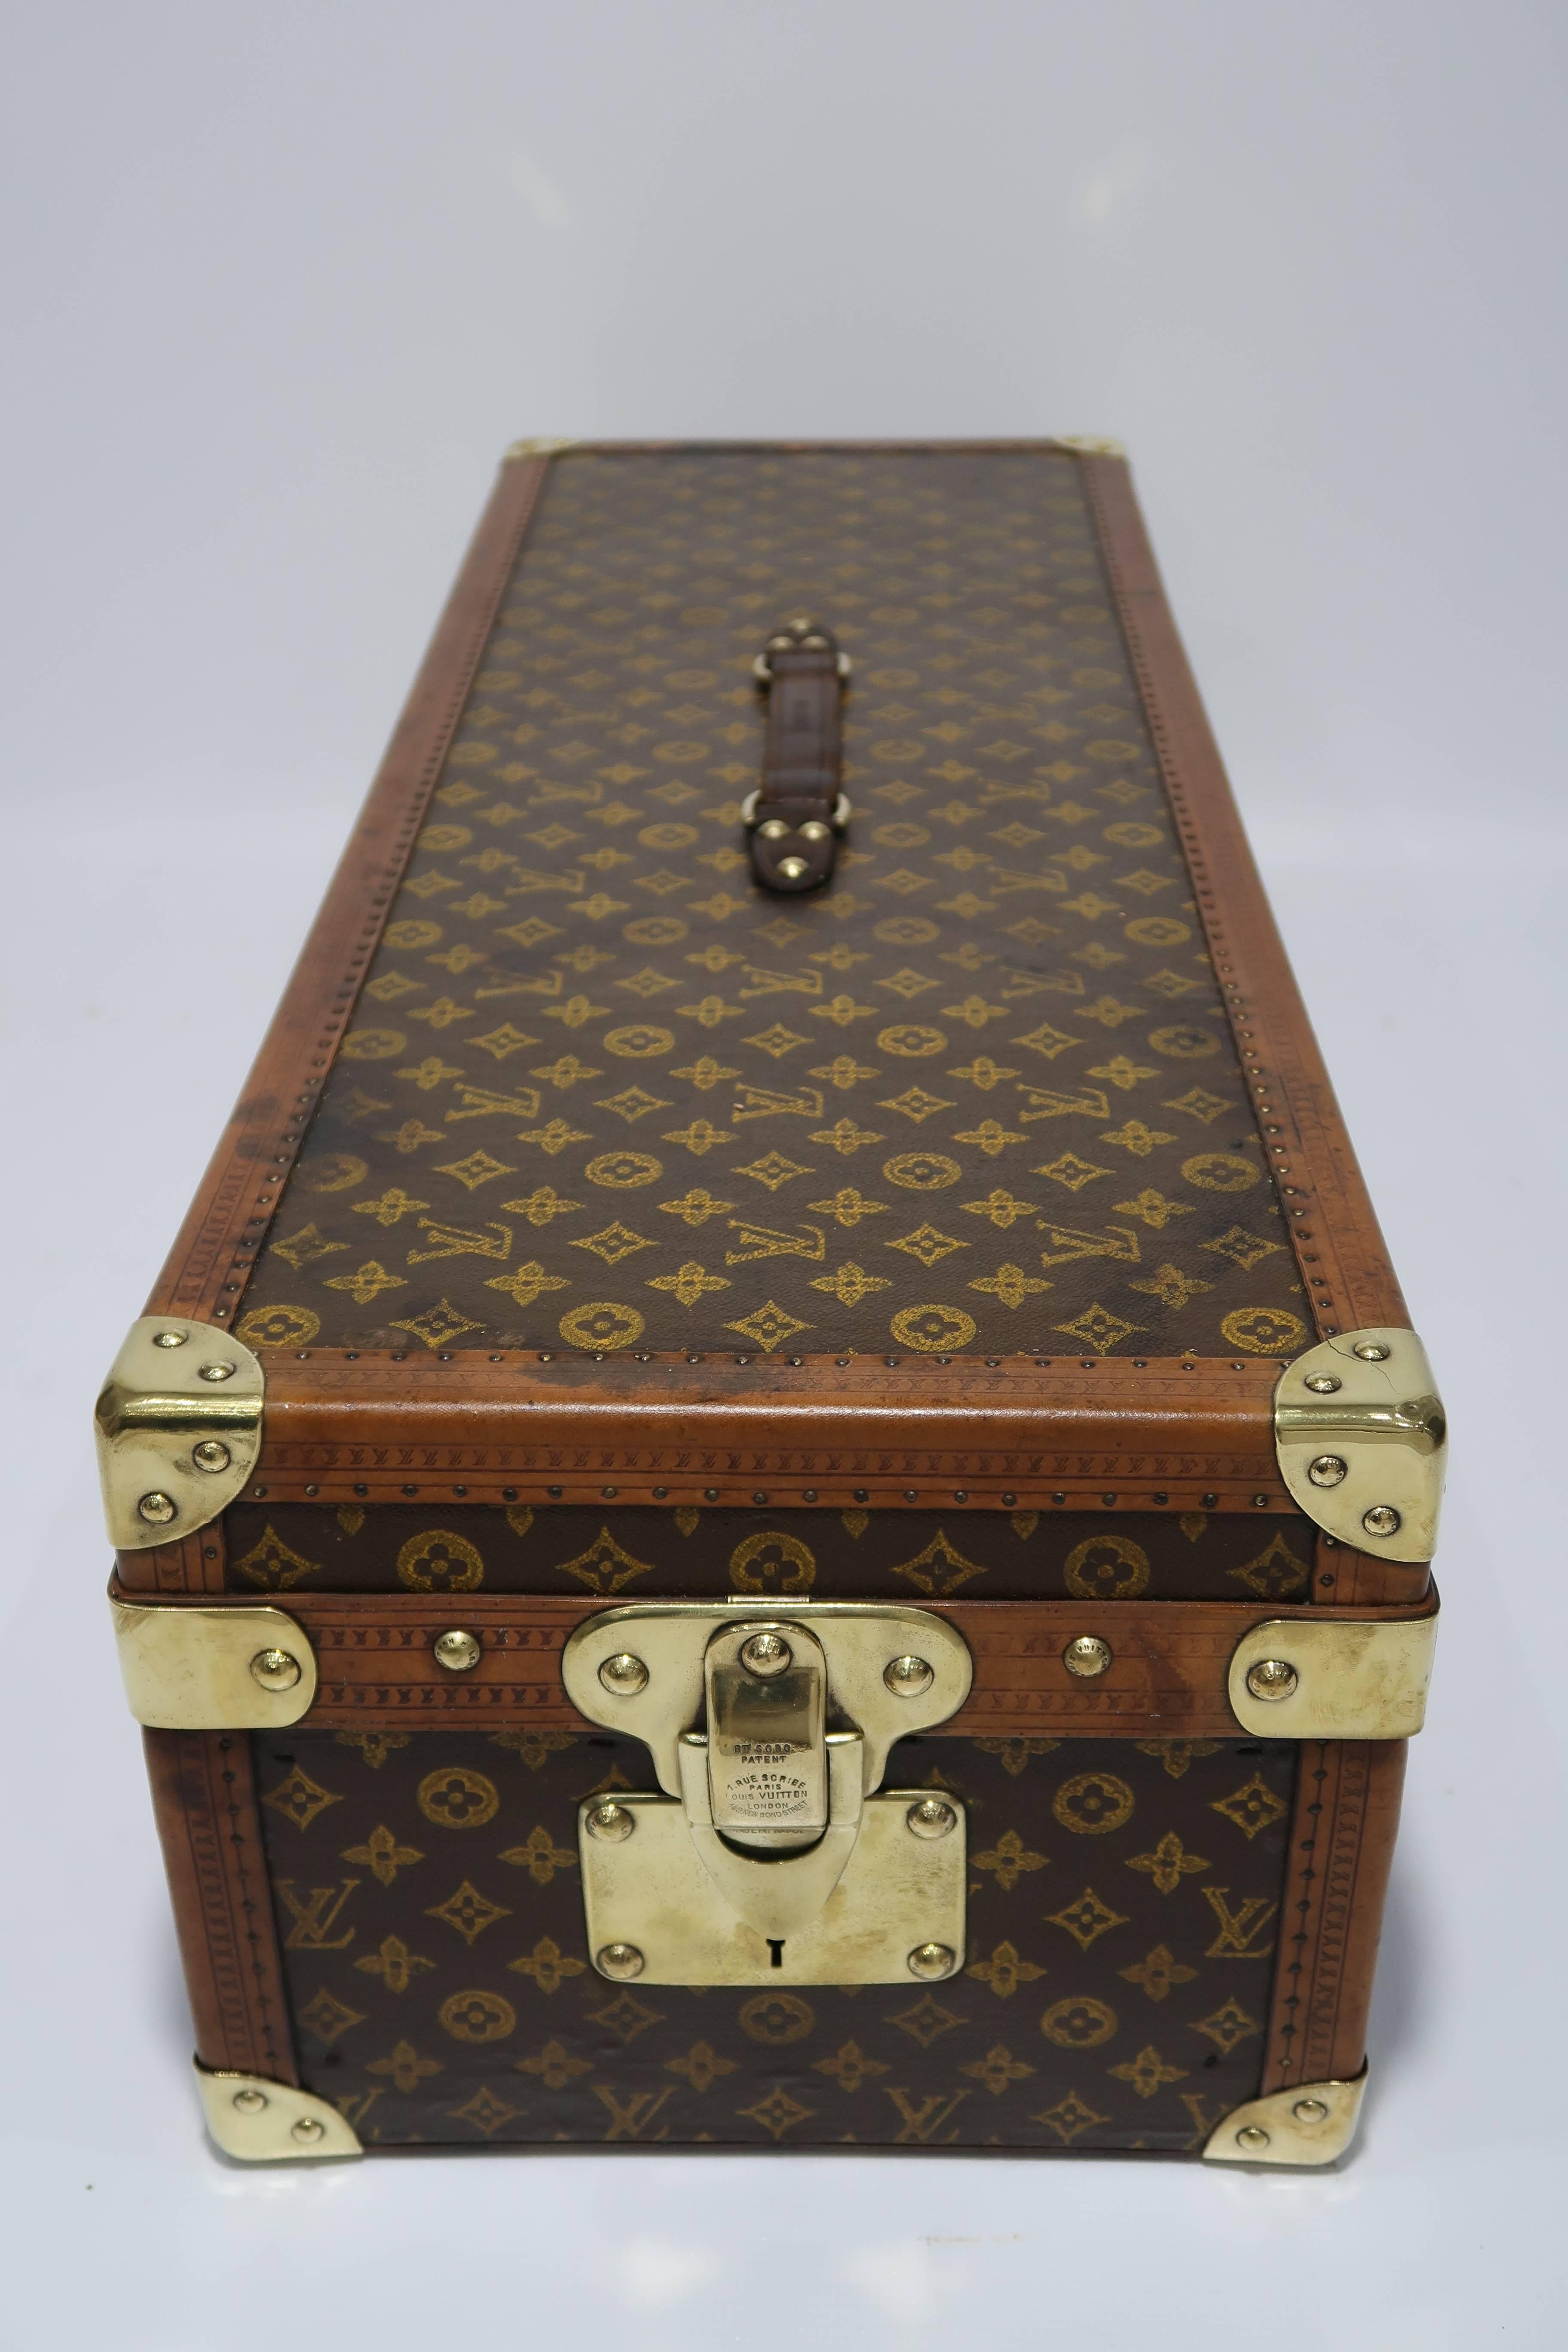 Early 20th Century 1910 Louis Vuitton Britannica Library Trunk with Complete Britannica Set For Sale